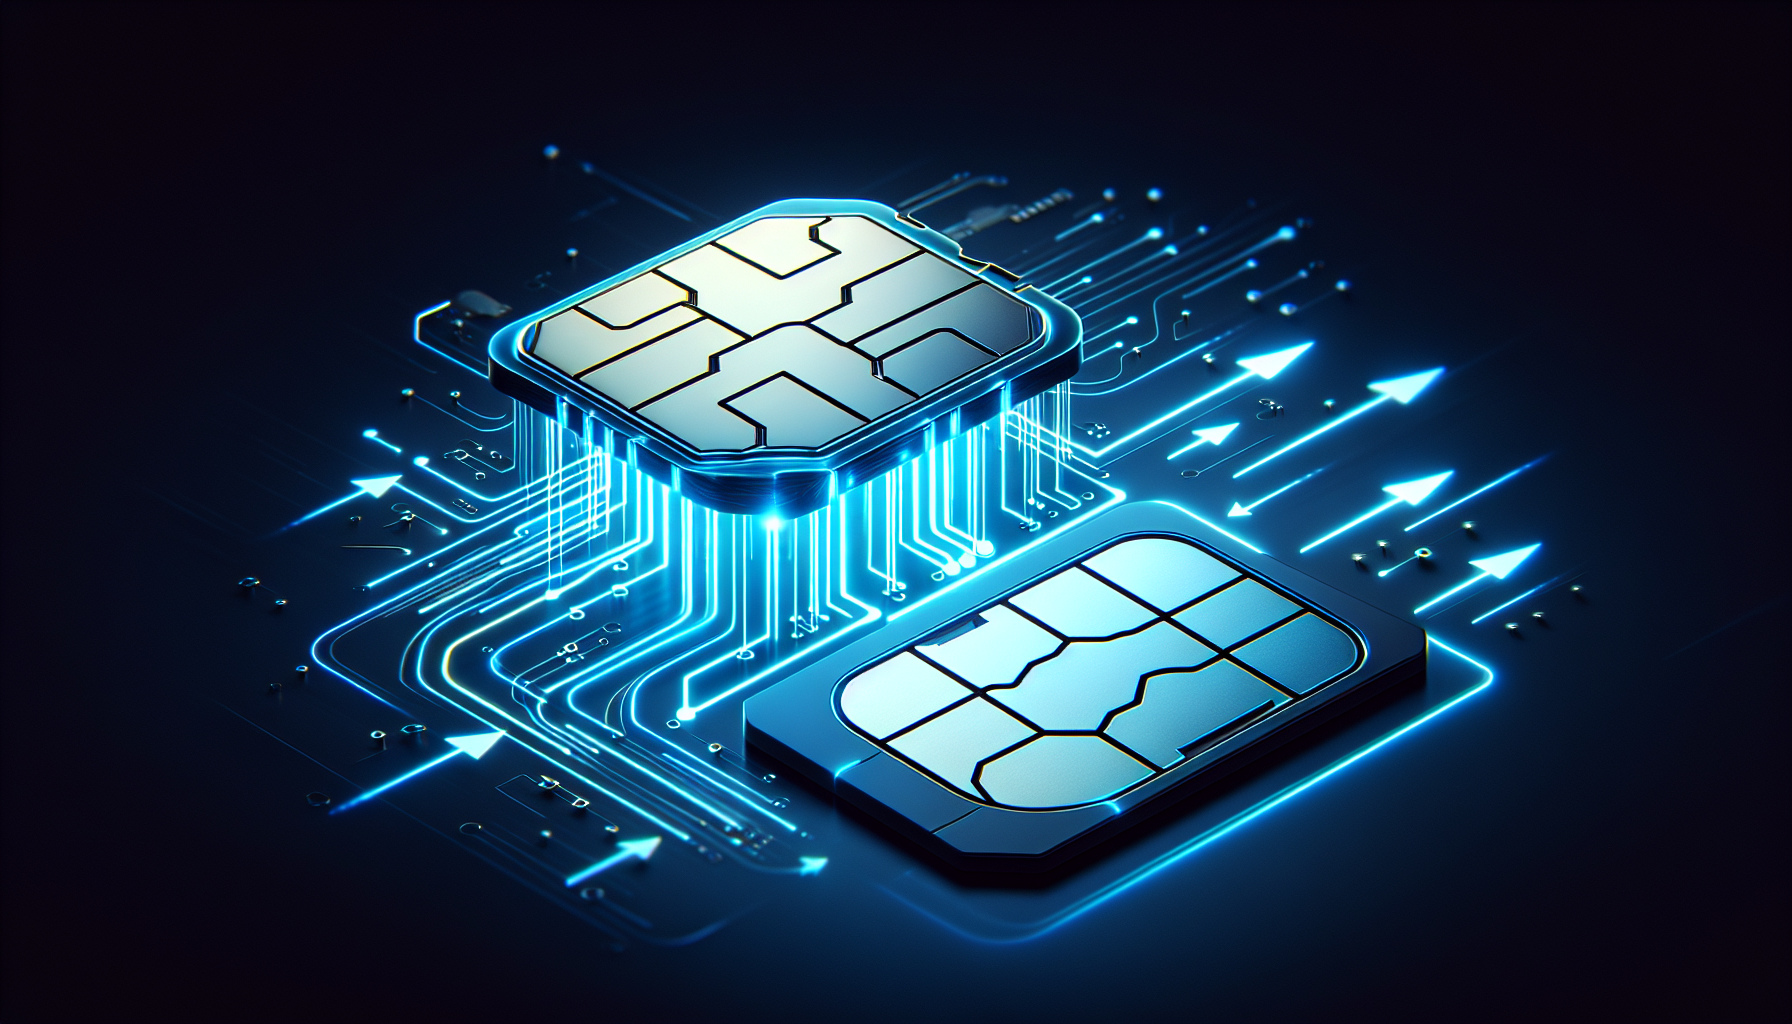 Illustration demonstrating the technology behind eSIM and traditional SIM cards